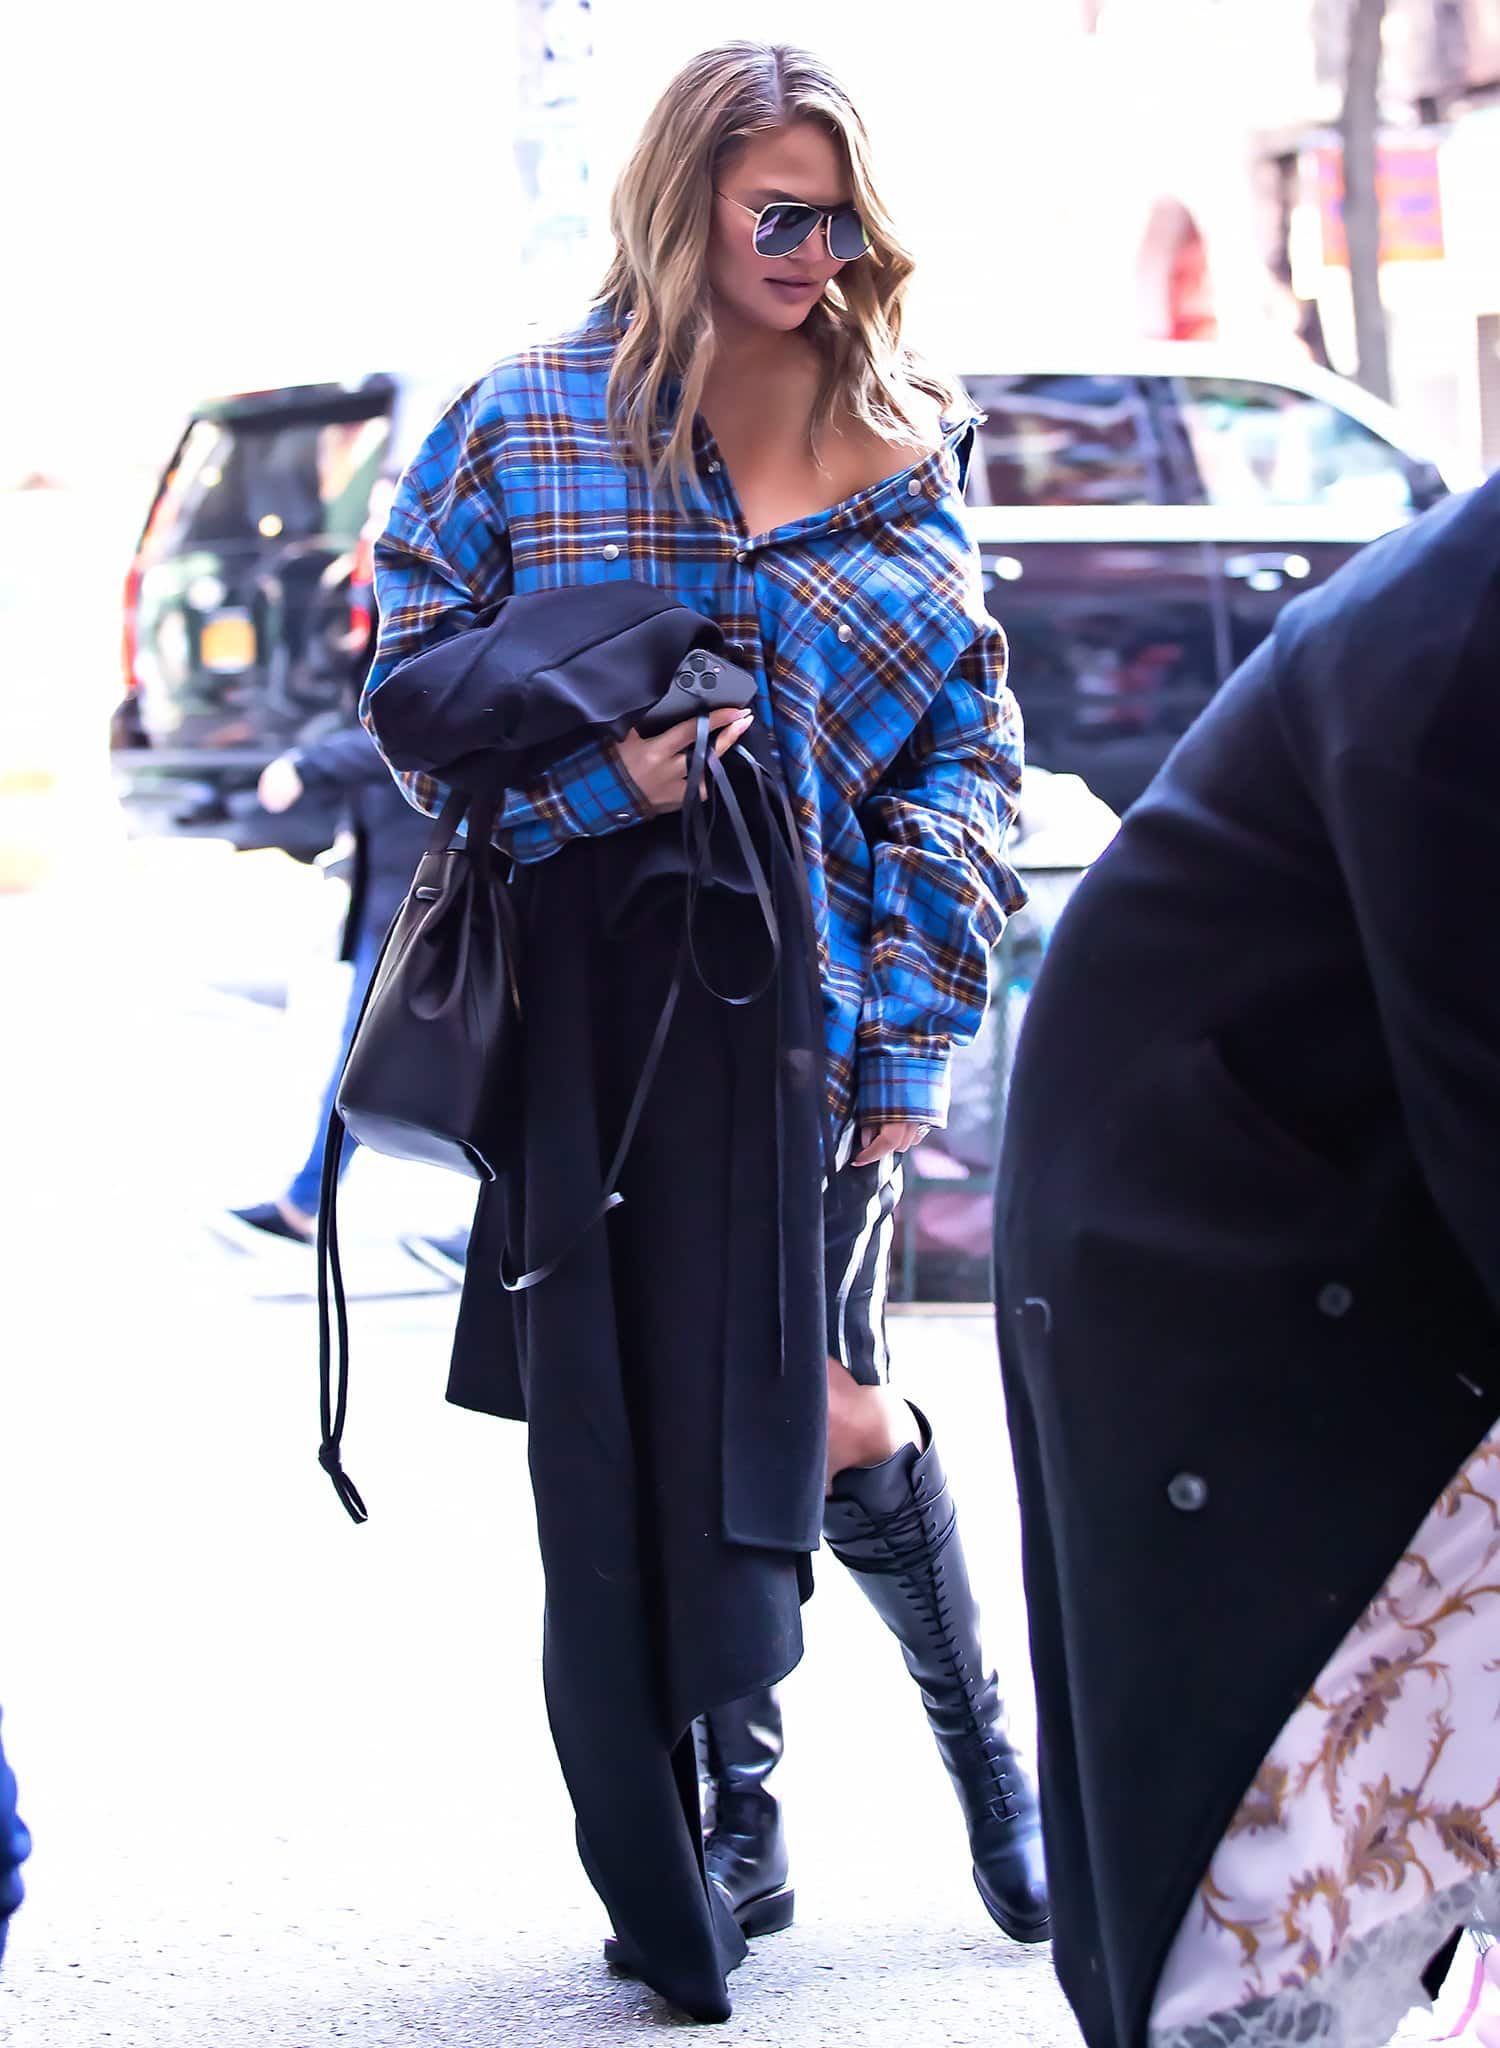 Chrissy Teigen showcases sexy grunge look in Rick Owens plaid shirt dress while grabbing lunch at Bar Pitti in NYC on December 4, 2021